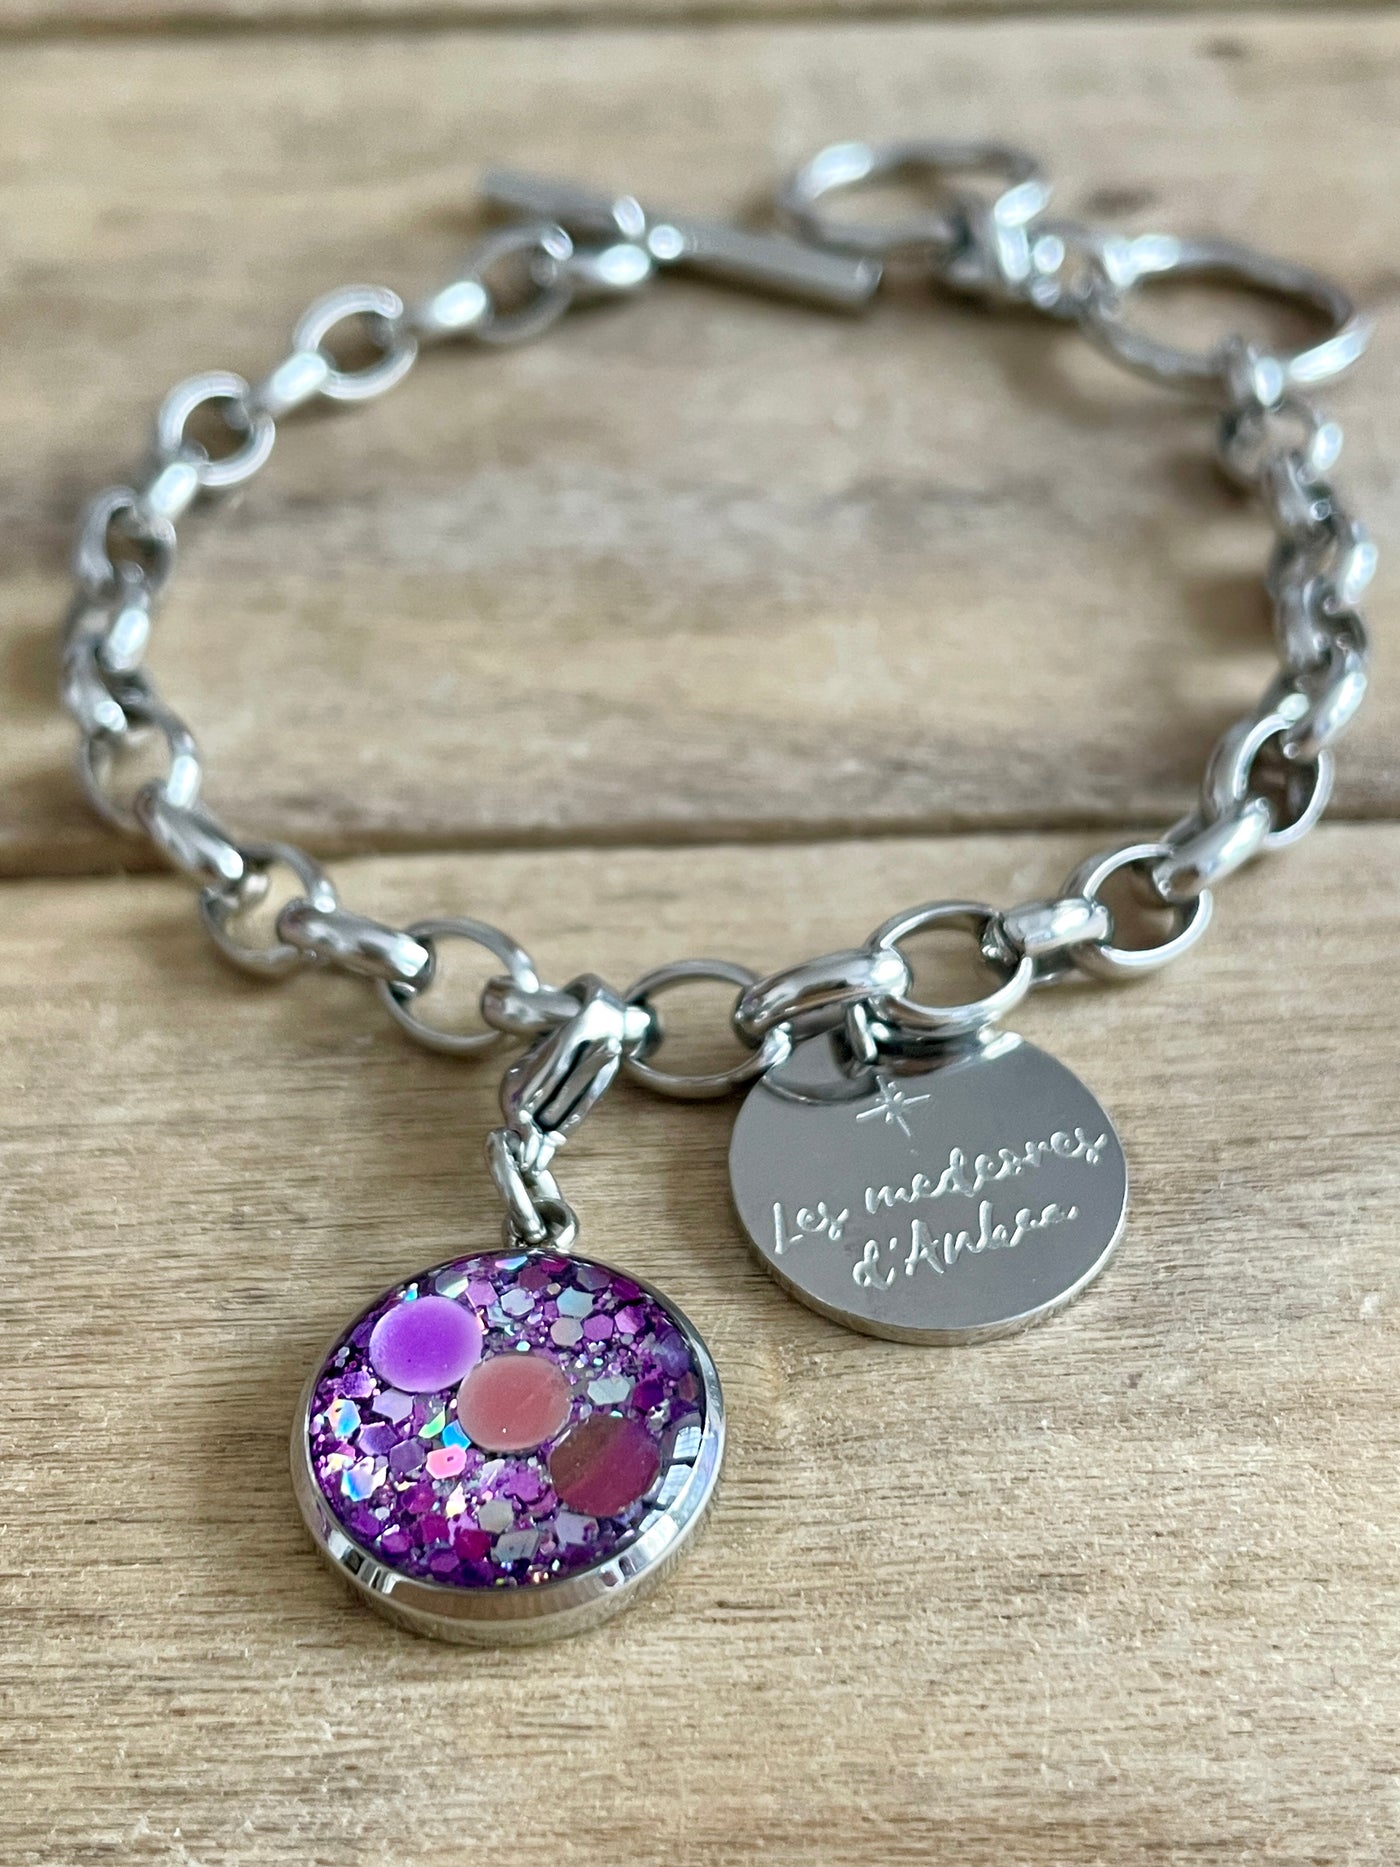 Letting go silver charm (charm sold alone)